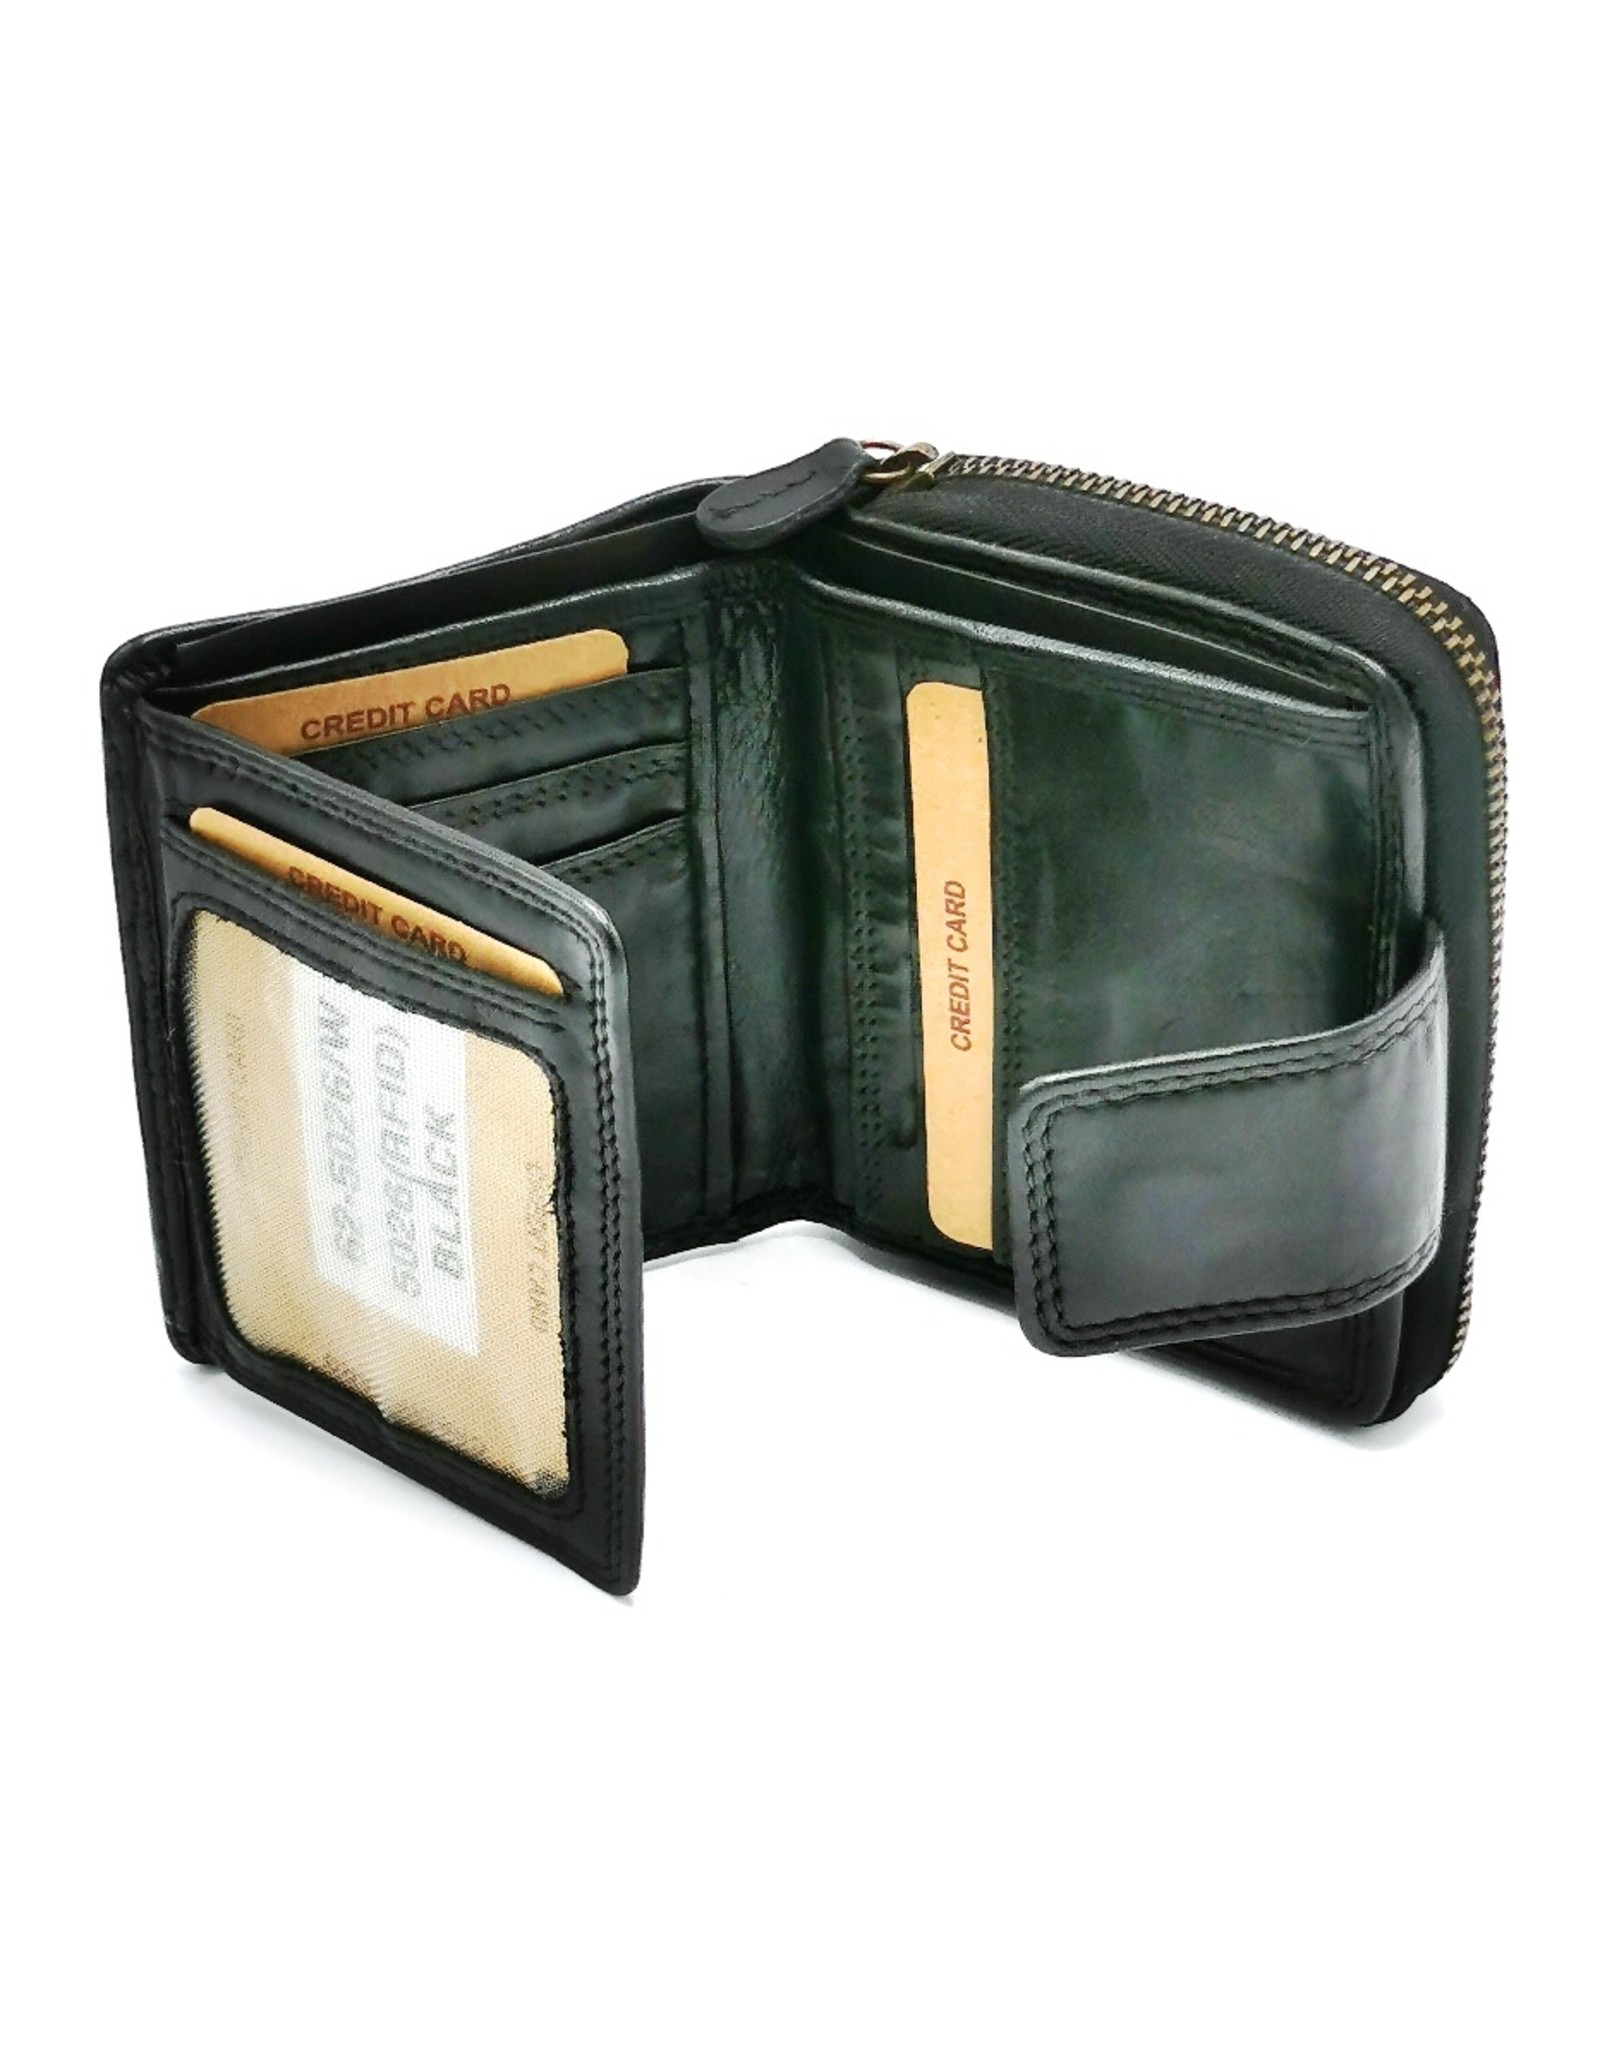 HillBurry Leather Wallets - HillBurry Wallet Washed Leather Black